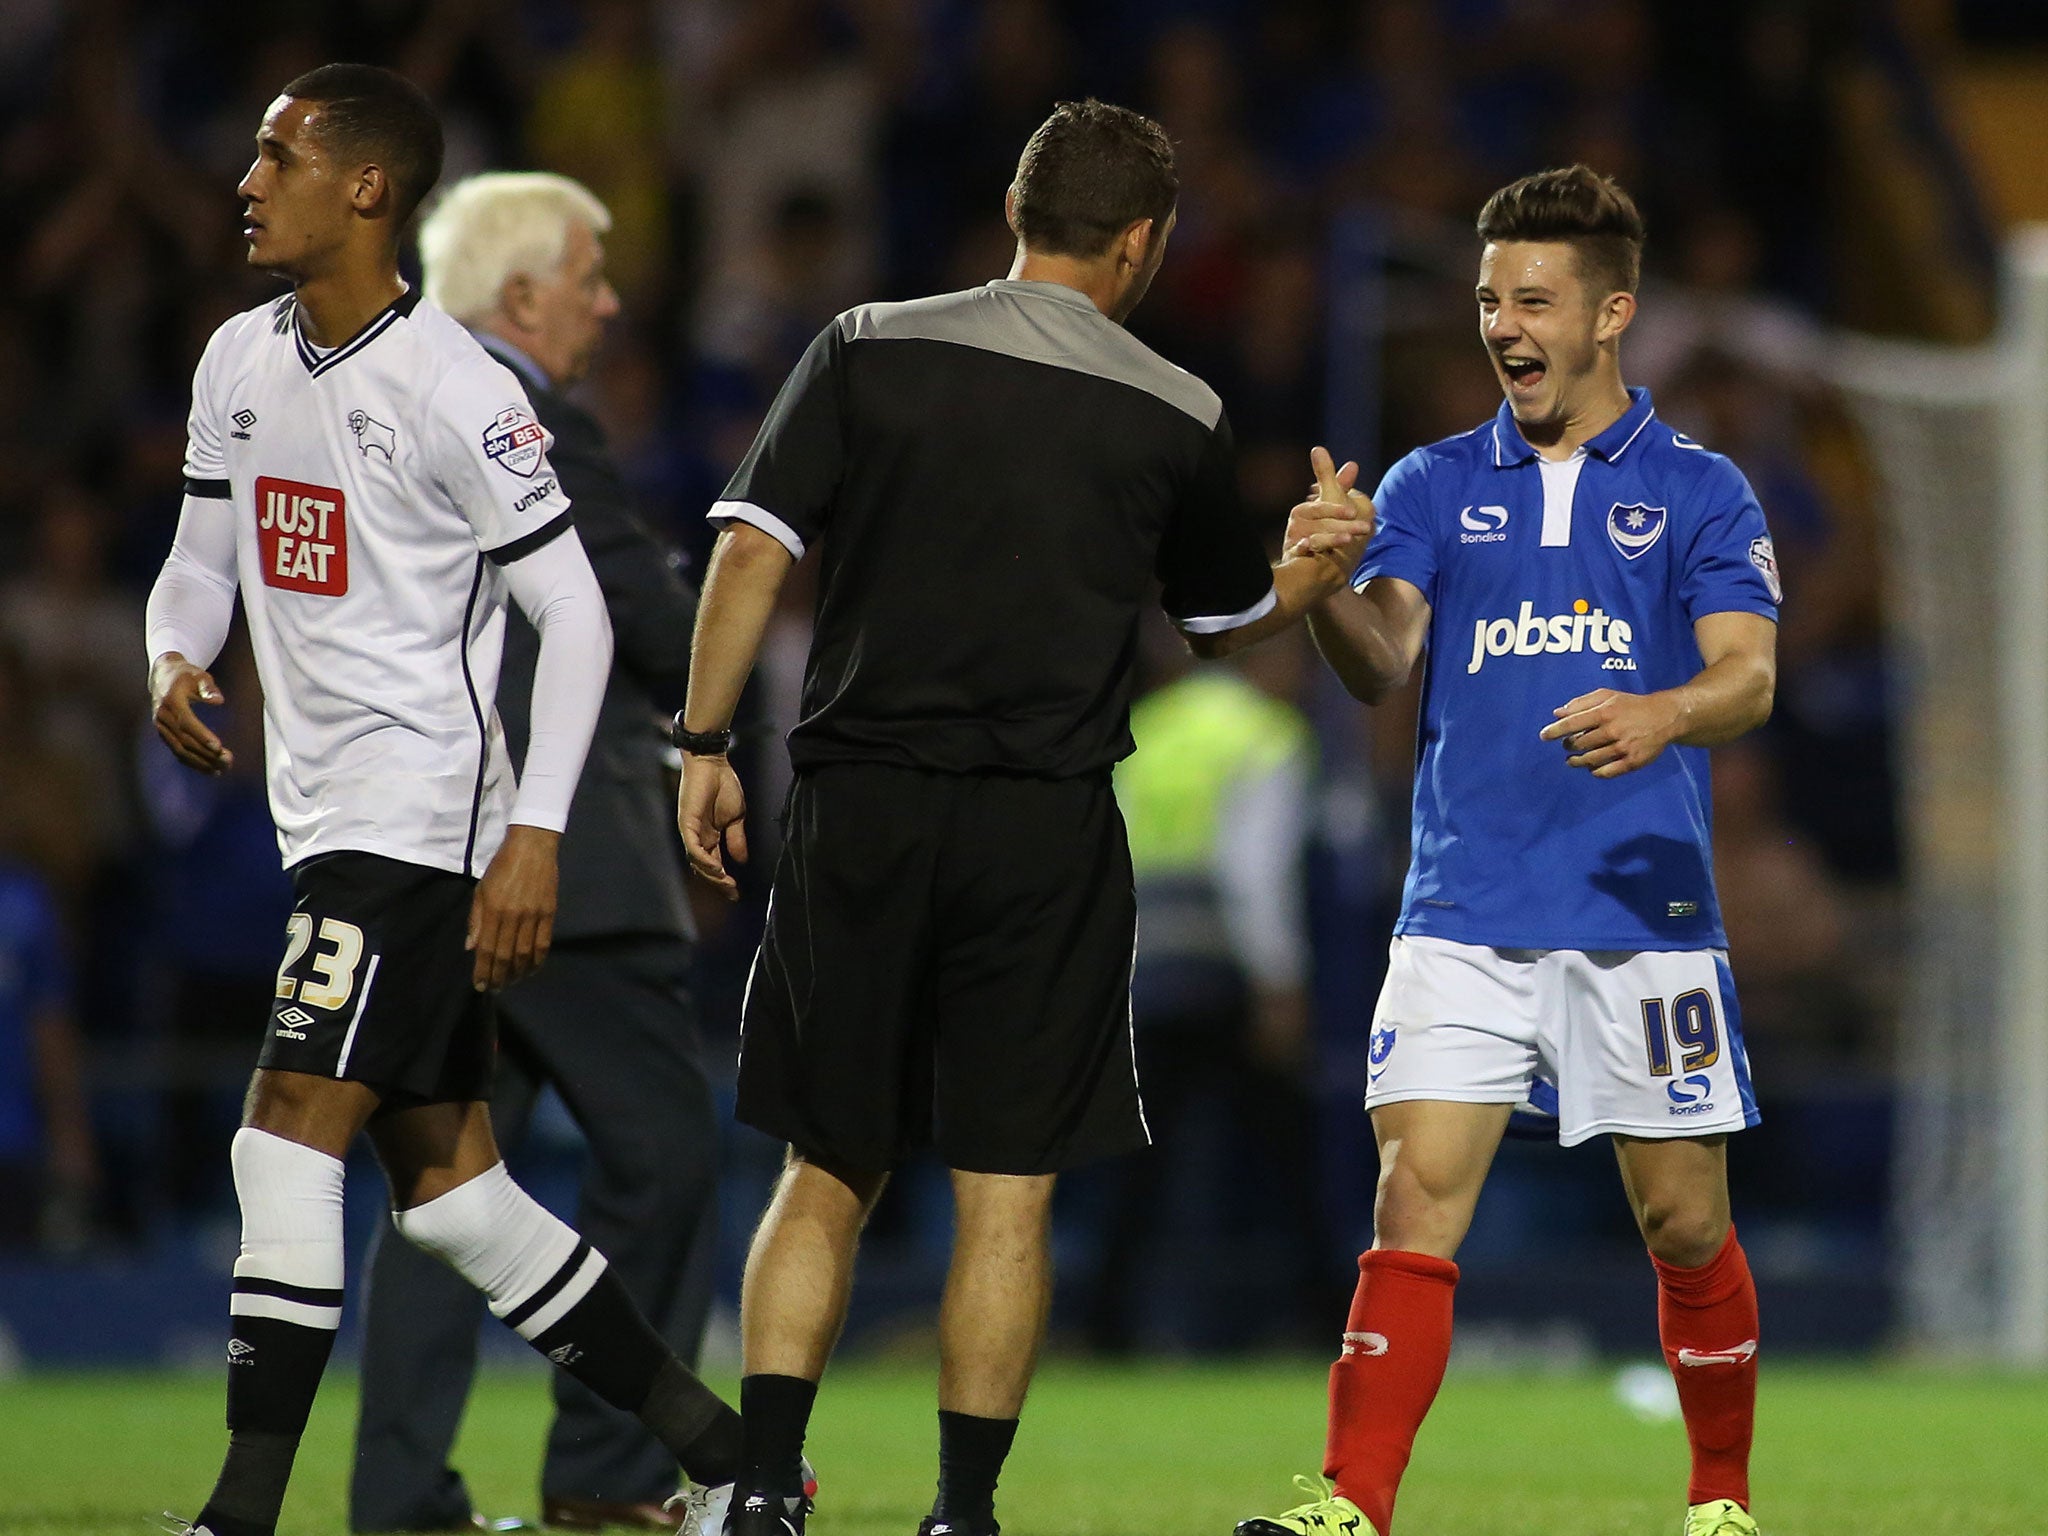 Portsmouth’s 18-year-old striker Conor Chaplin (right) is congratulated  at the final whistle after scoring their winner against Derby on Wednesda